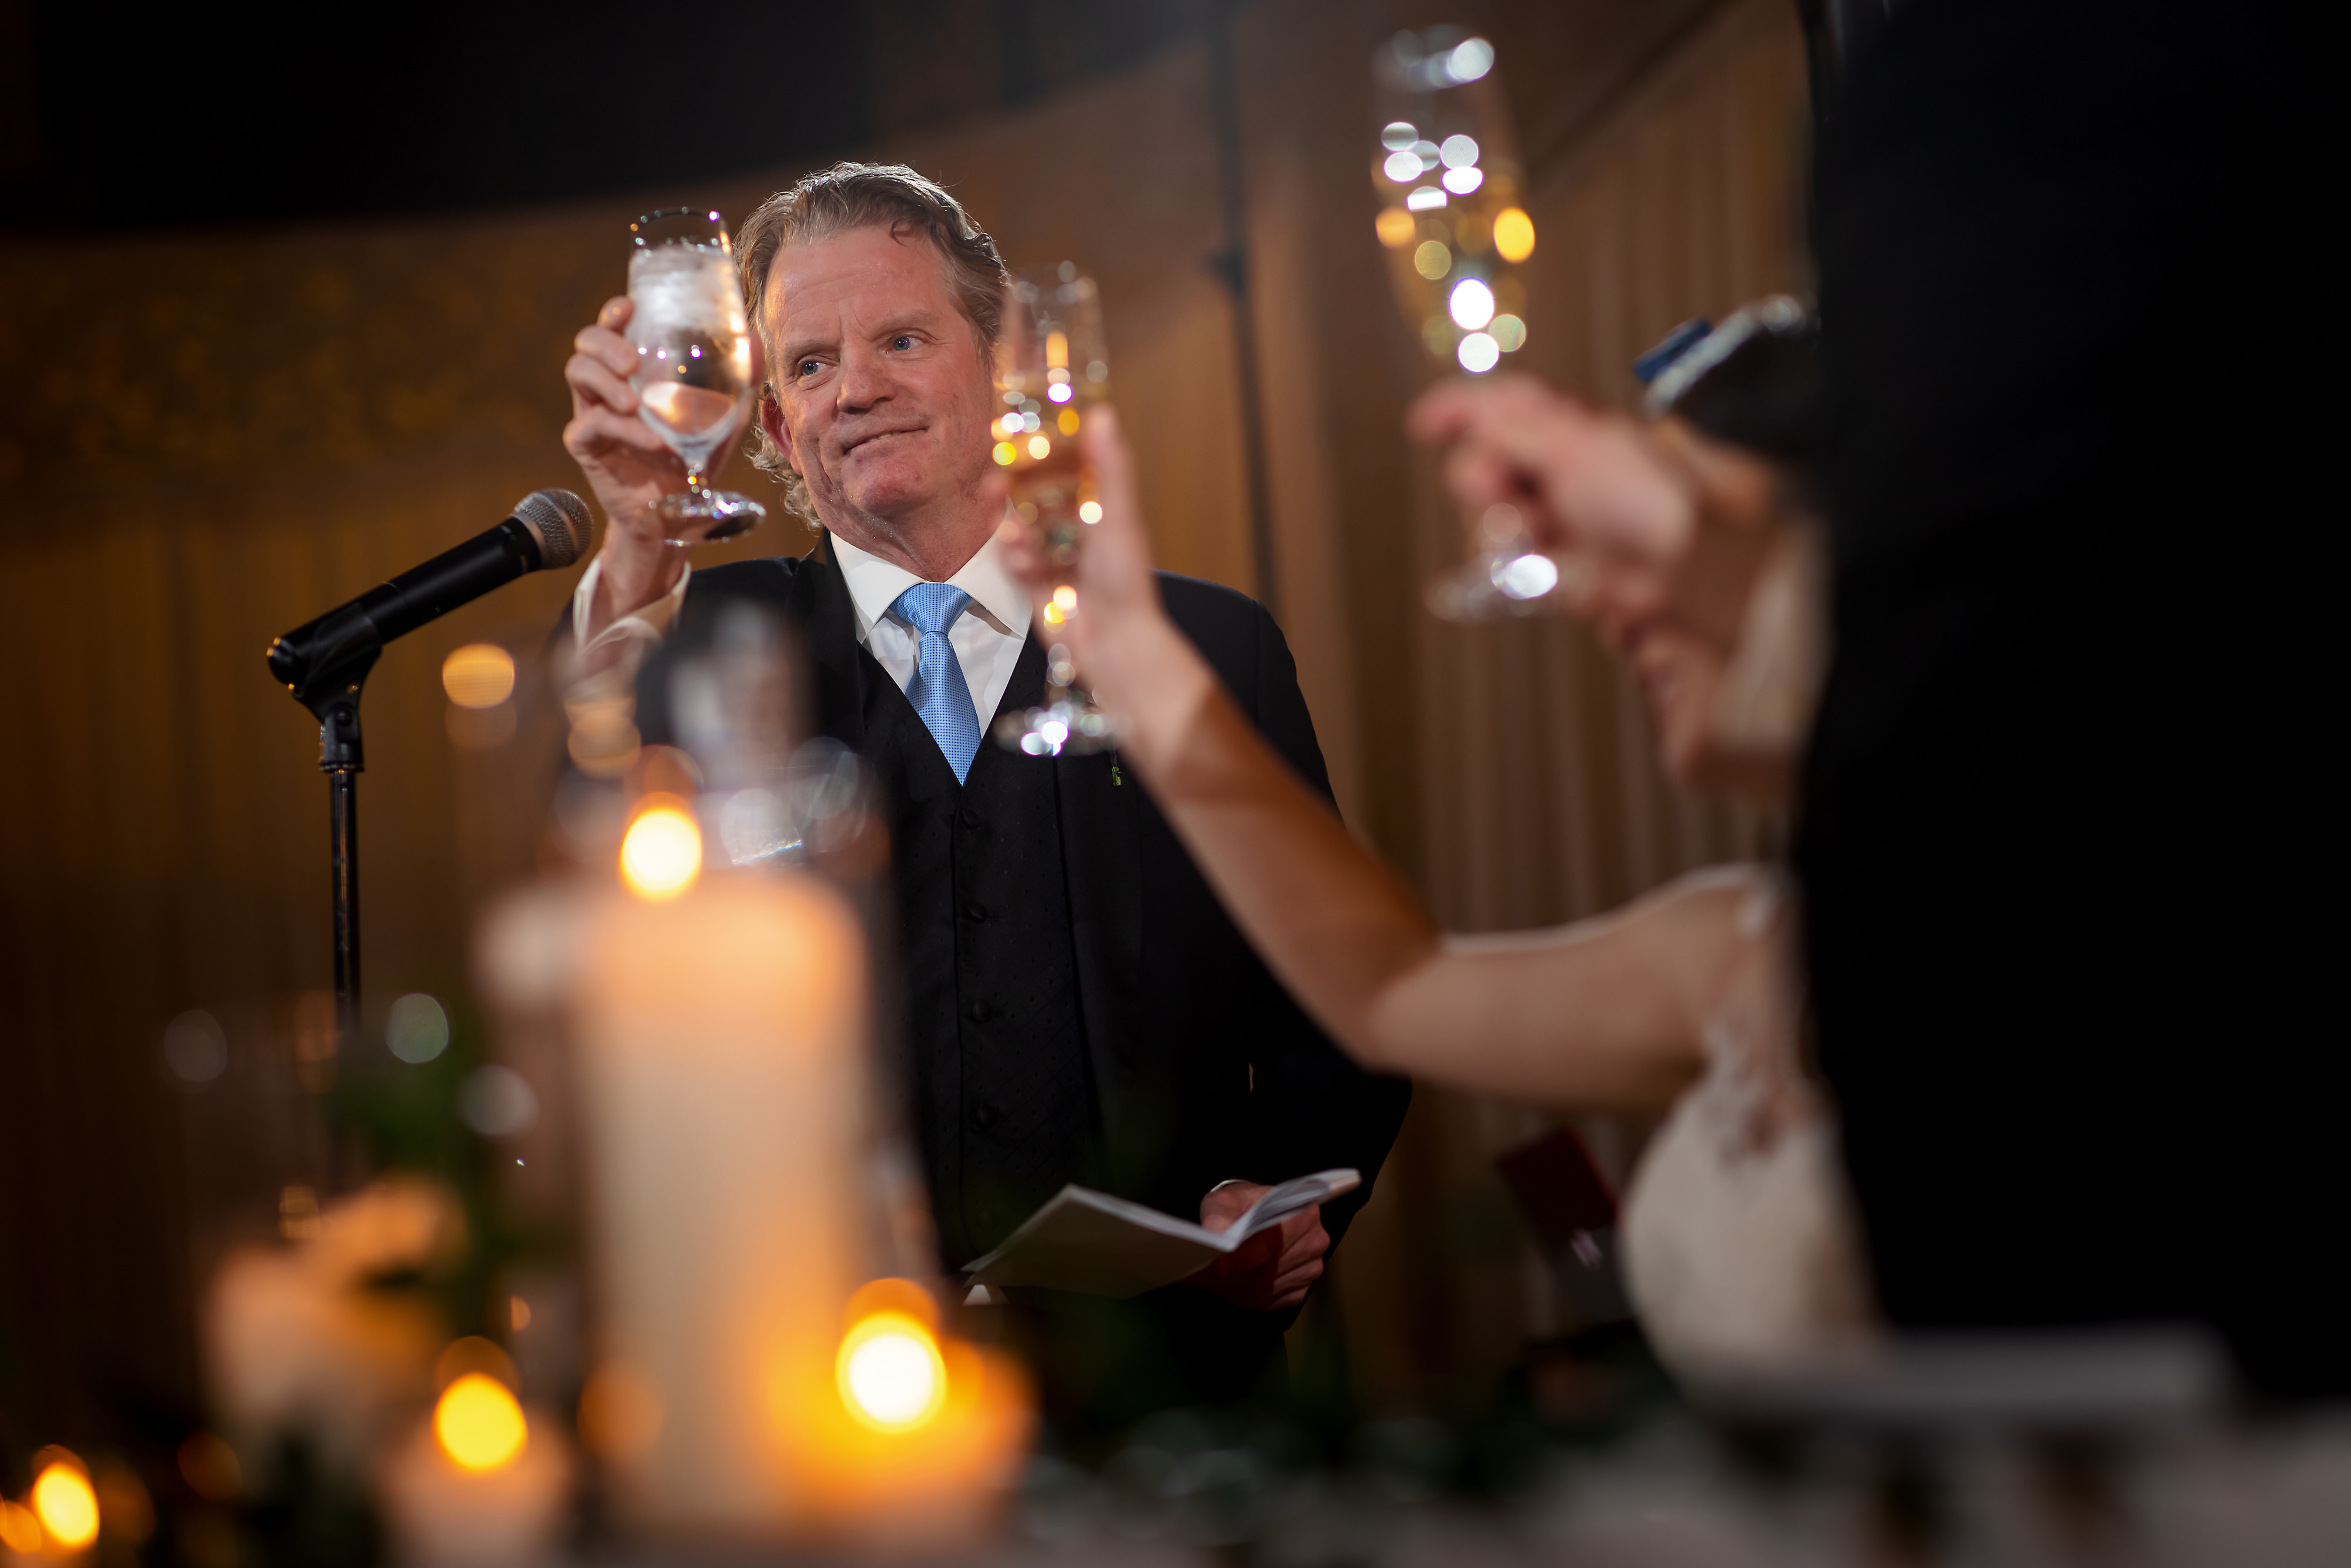 Father of the bride toast during wedding reception at the Rookery Building in Chicago